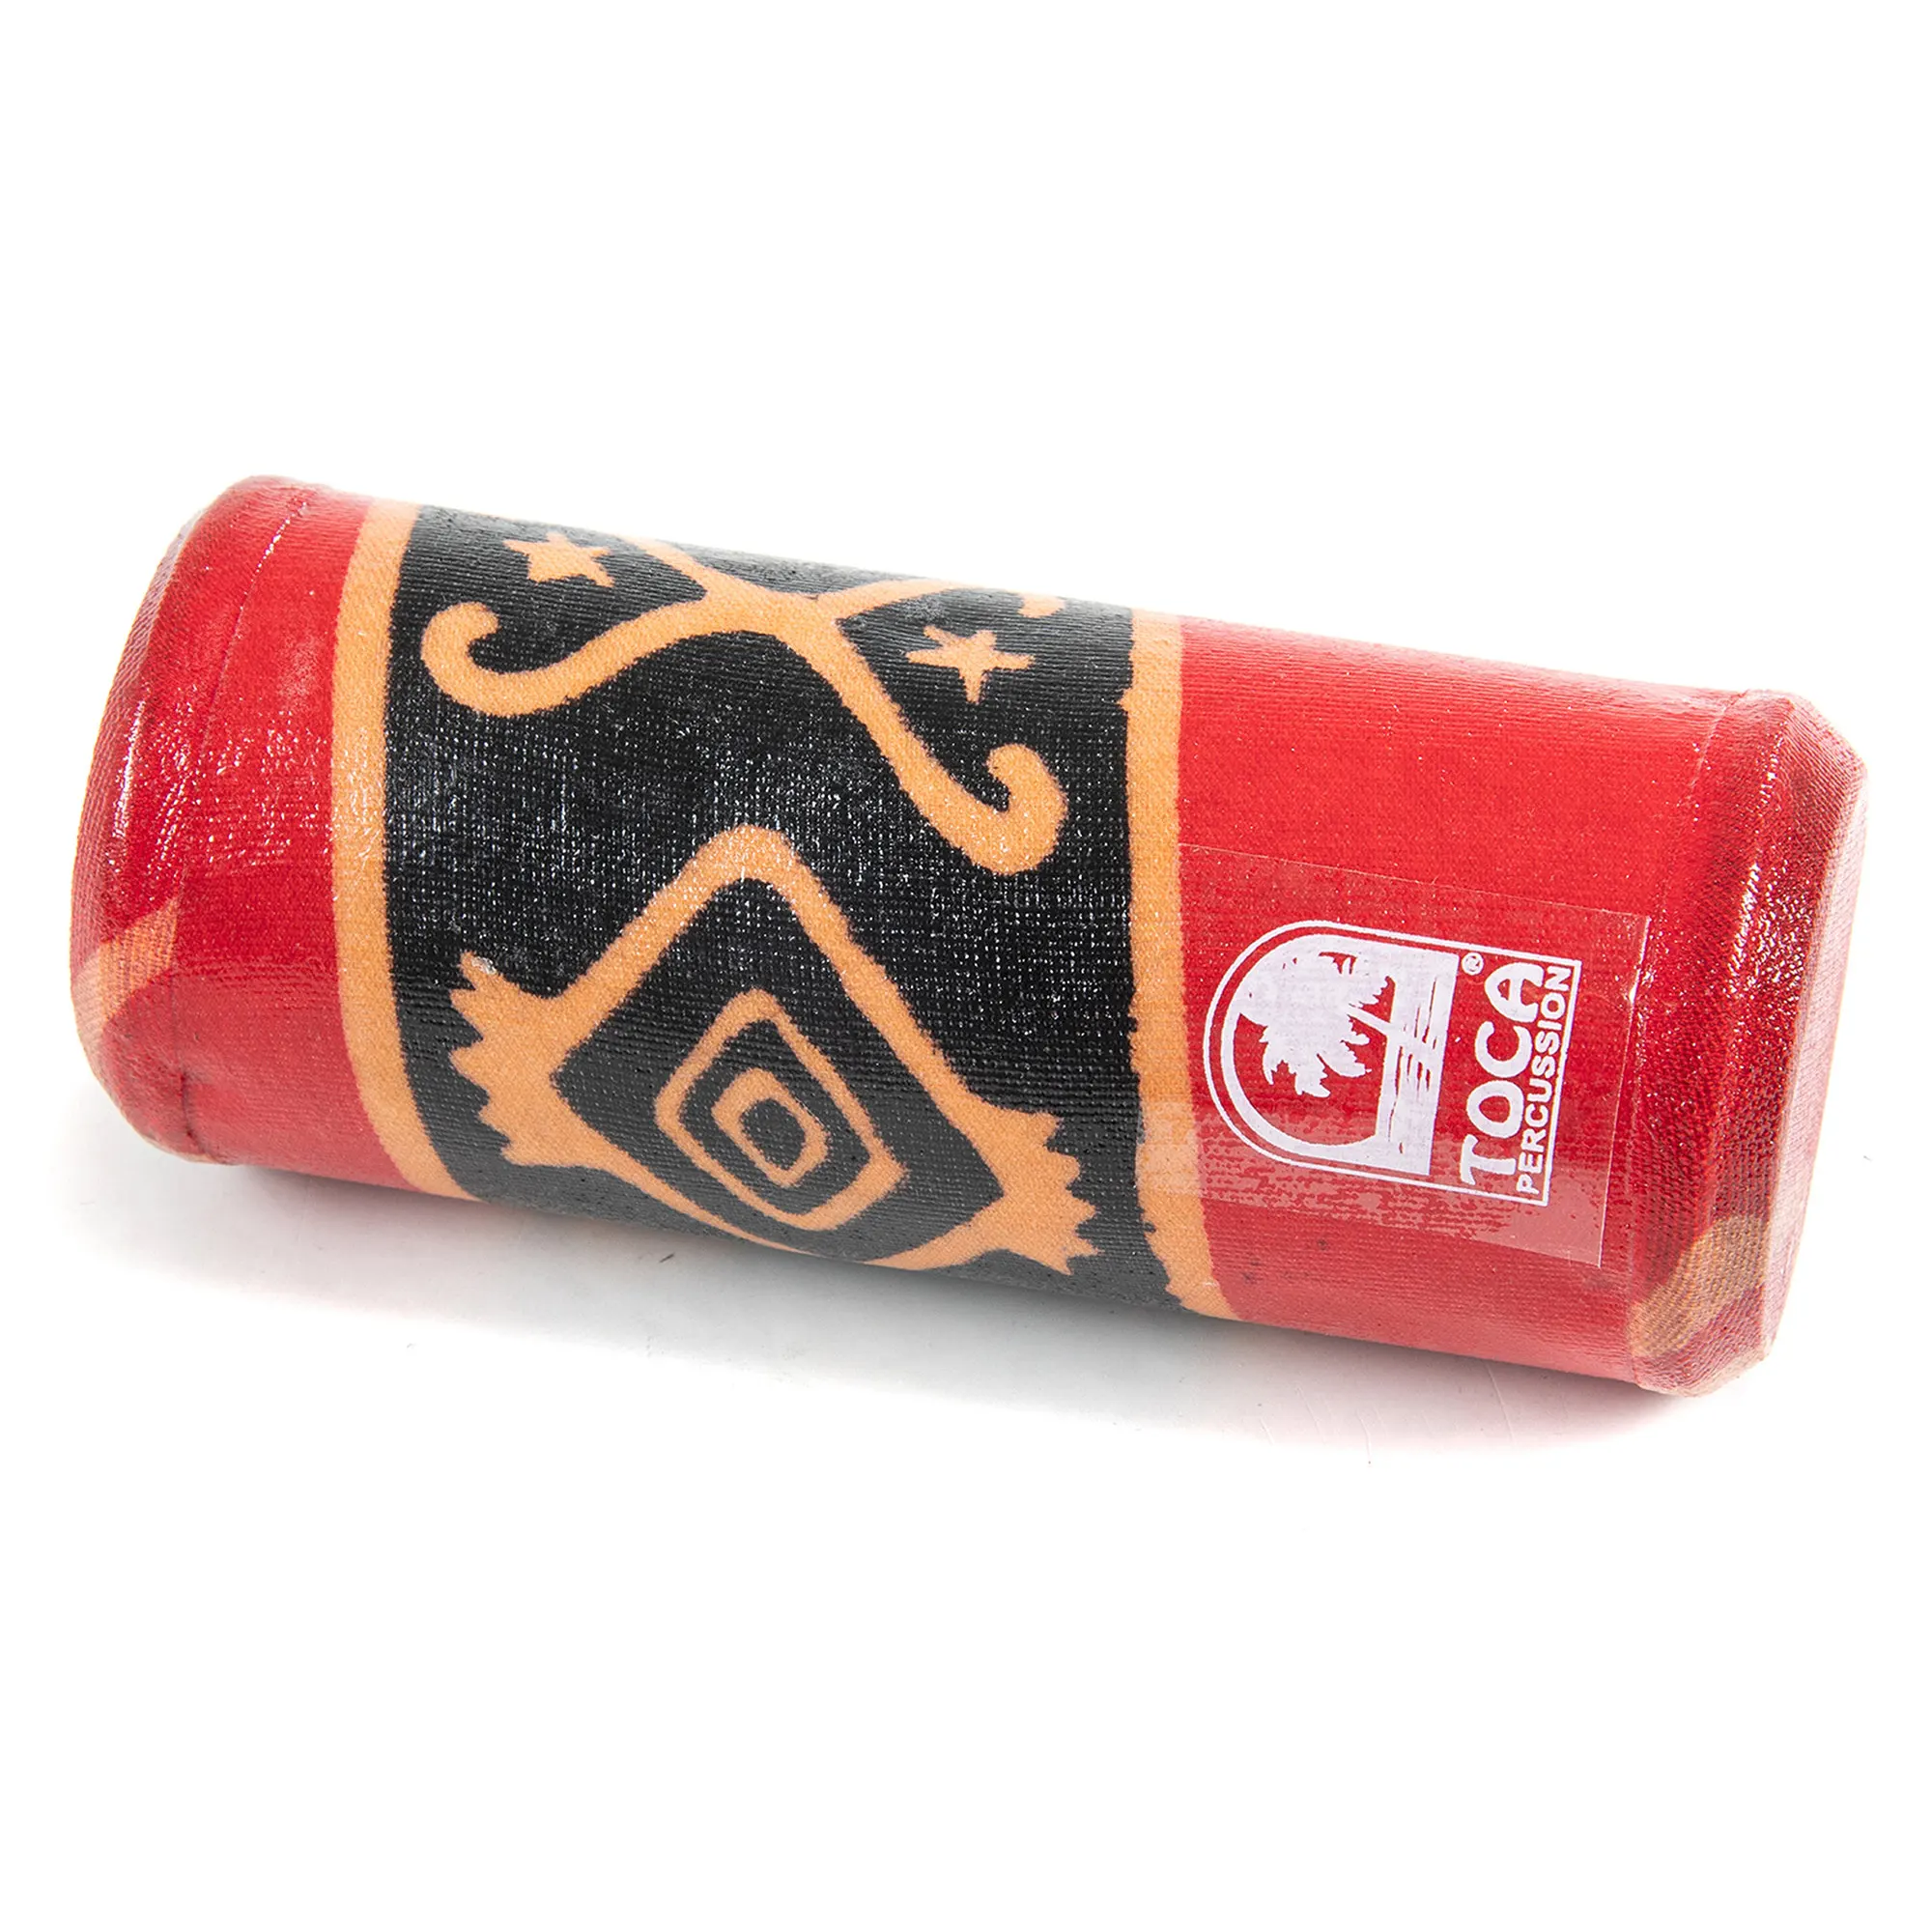 Toca Shaker Freestyle 2 Large Red